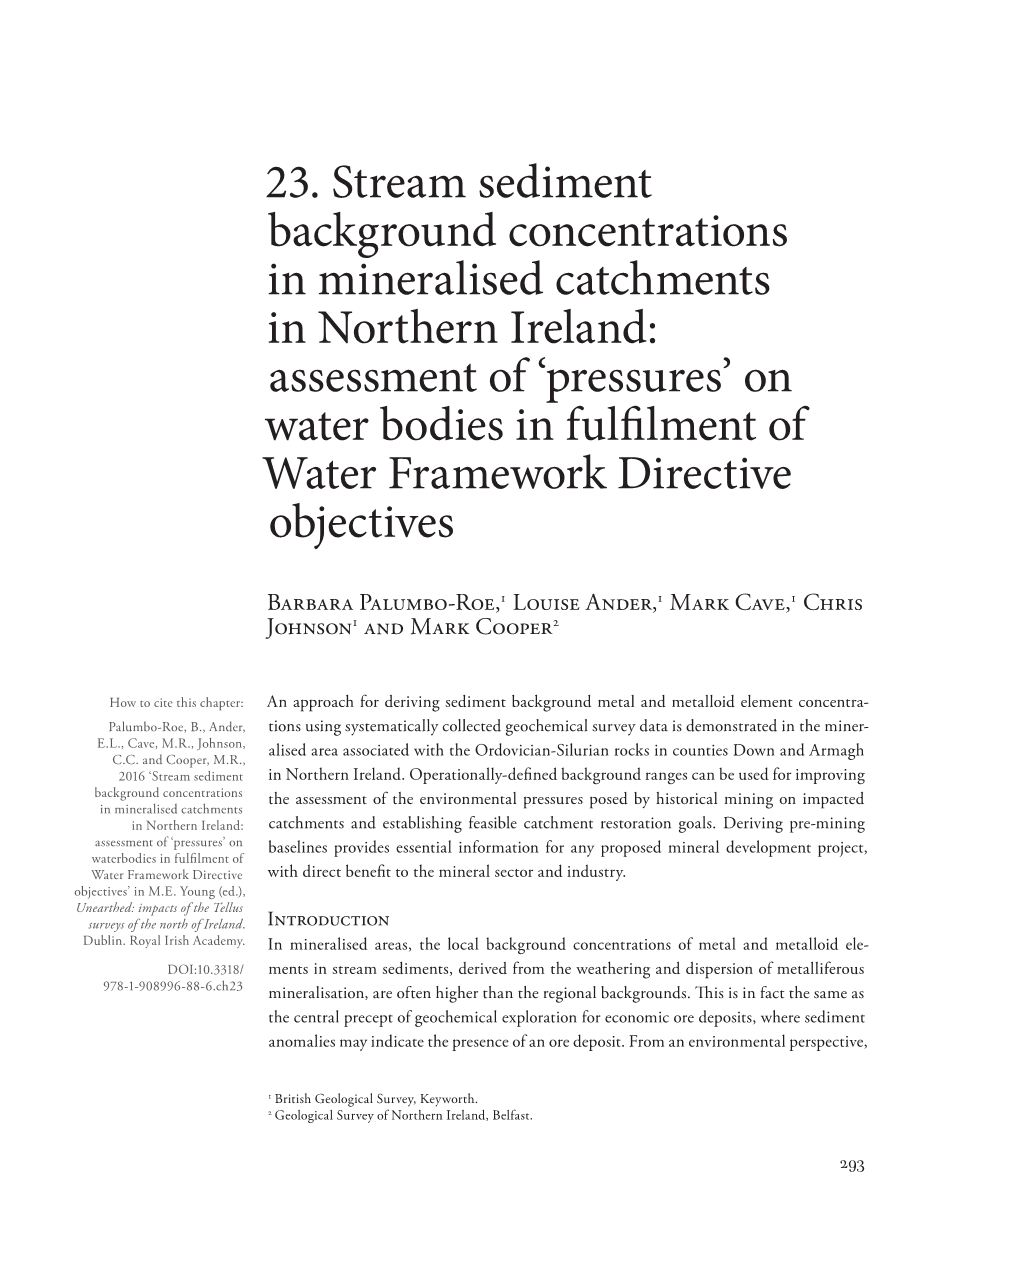 23. Stream Sediment Background Concentrations in Mineralised Catchments in Northern Ireland